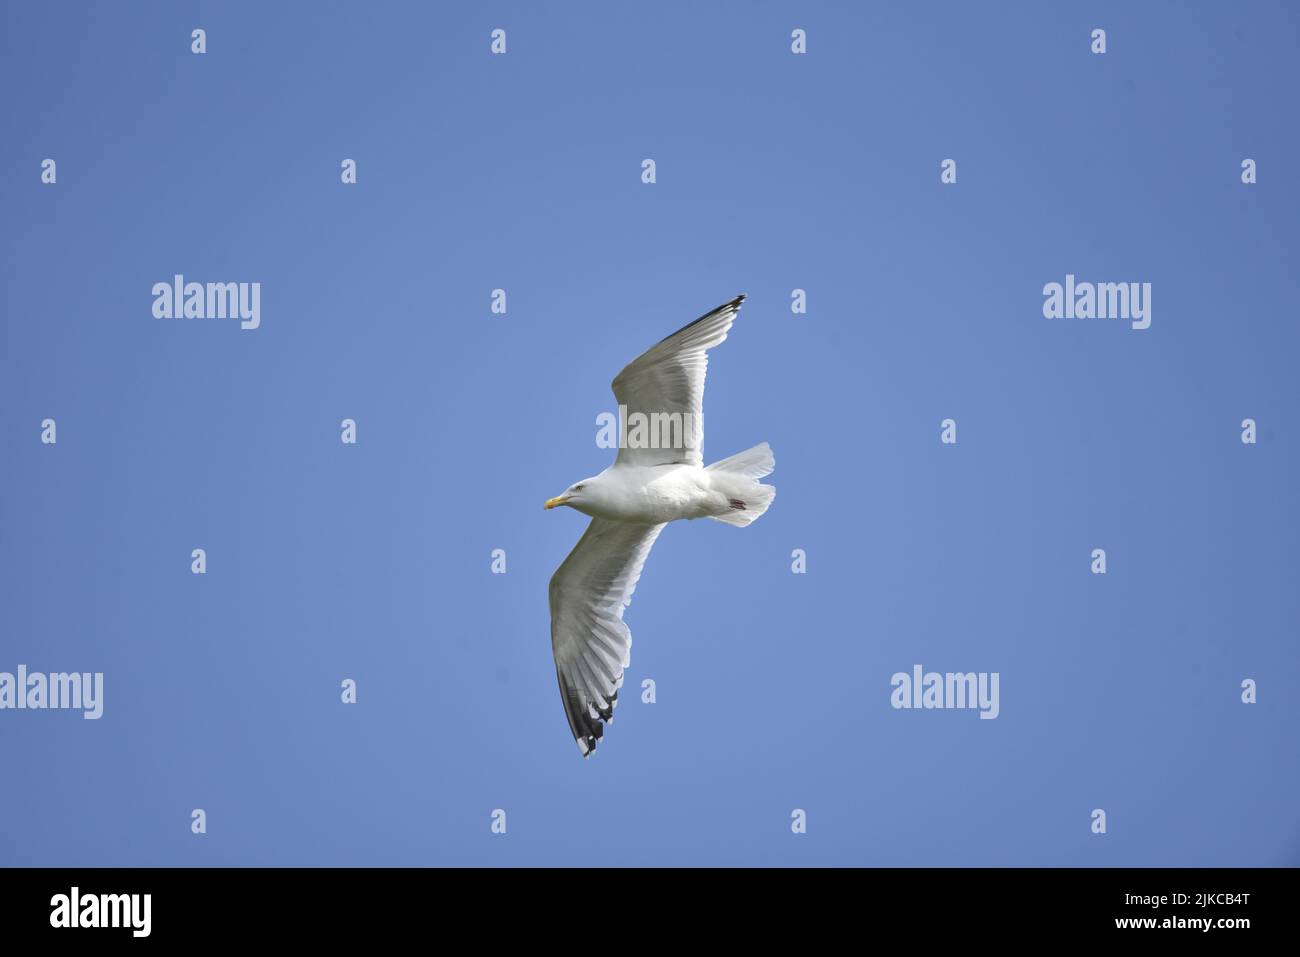 Close-Up Image of a European Herring Gull (Larus argentatus) Flying Right to Left, Wings Spread, Against a Sunny Blue Sky with Underside View, UK Stock Photo